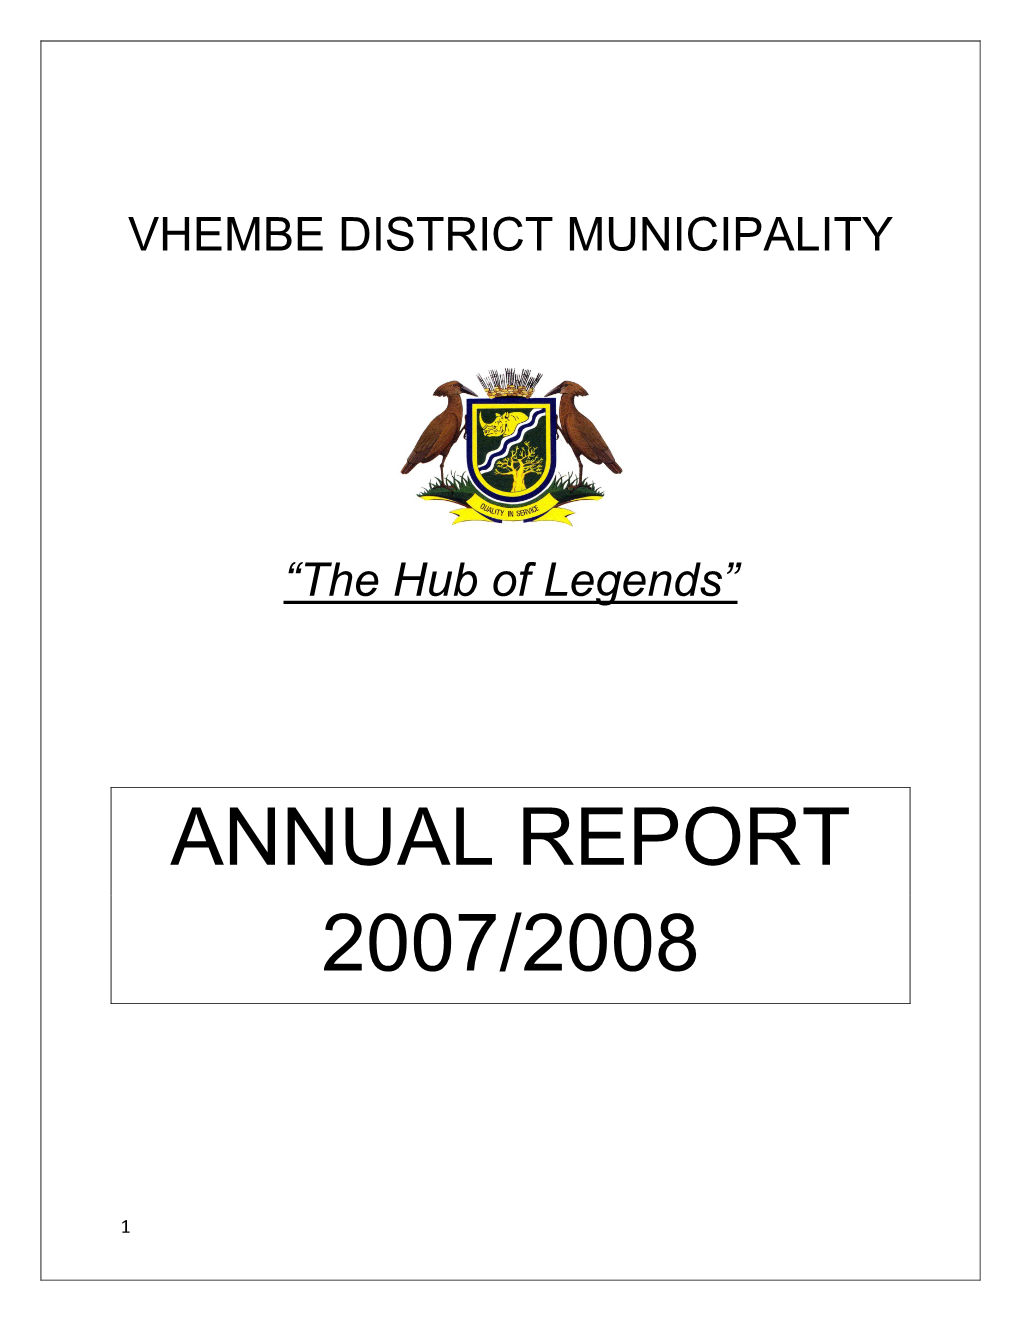 DC34 Vhembe Annual Report 2007-08